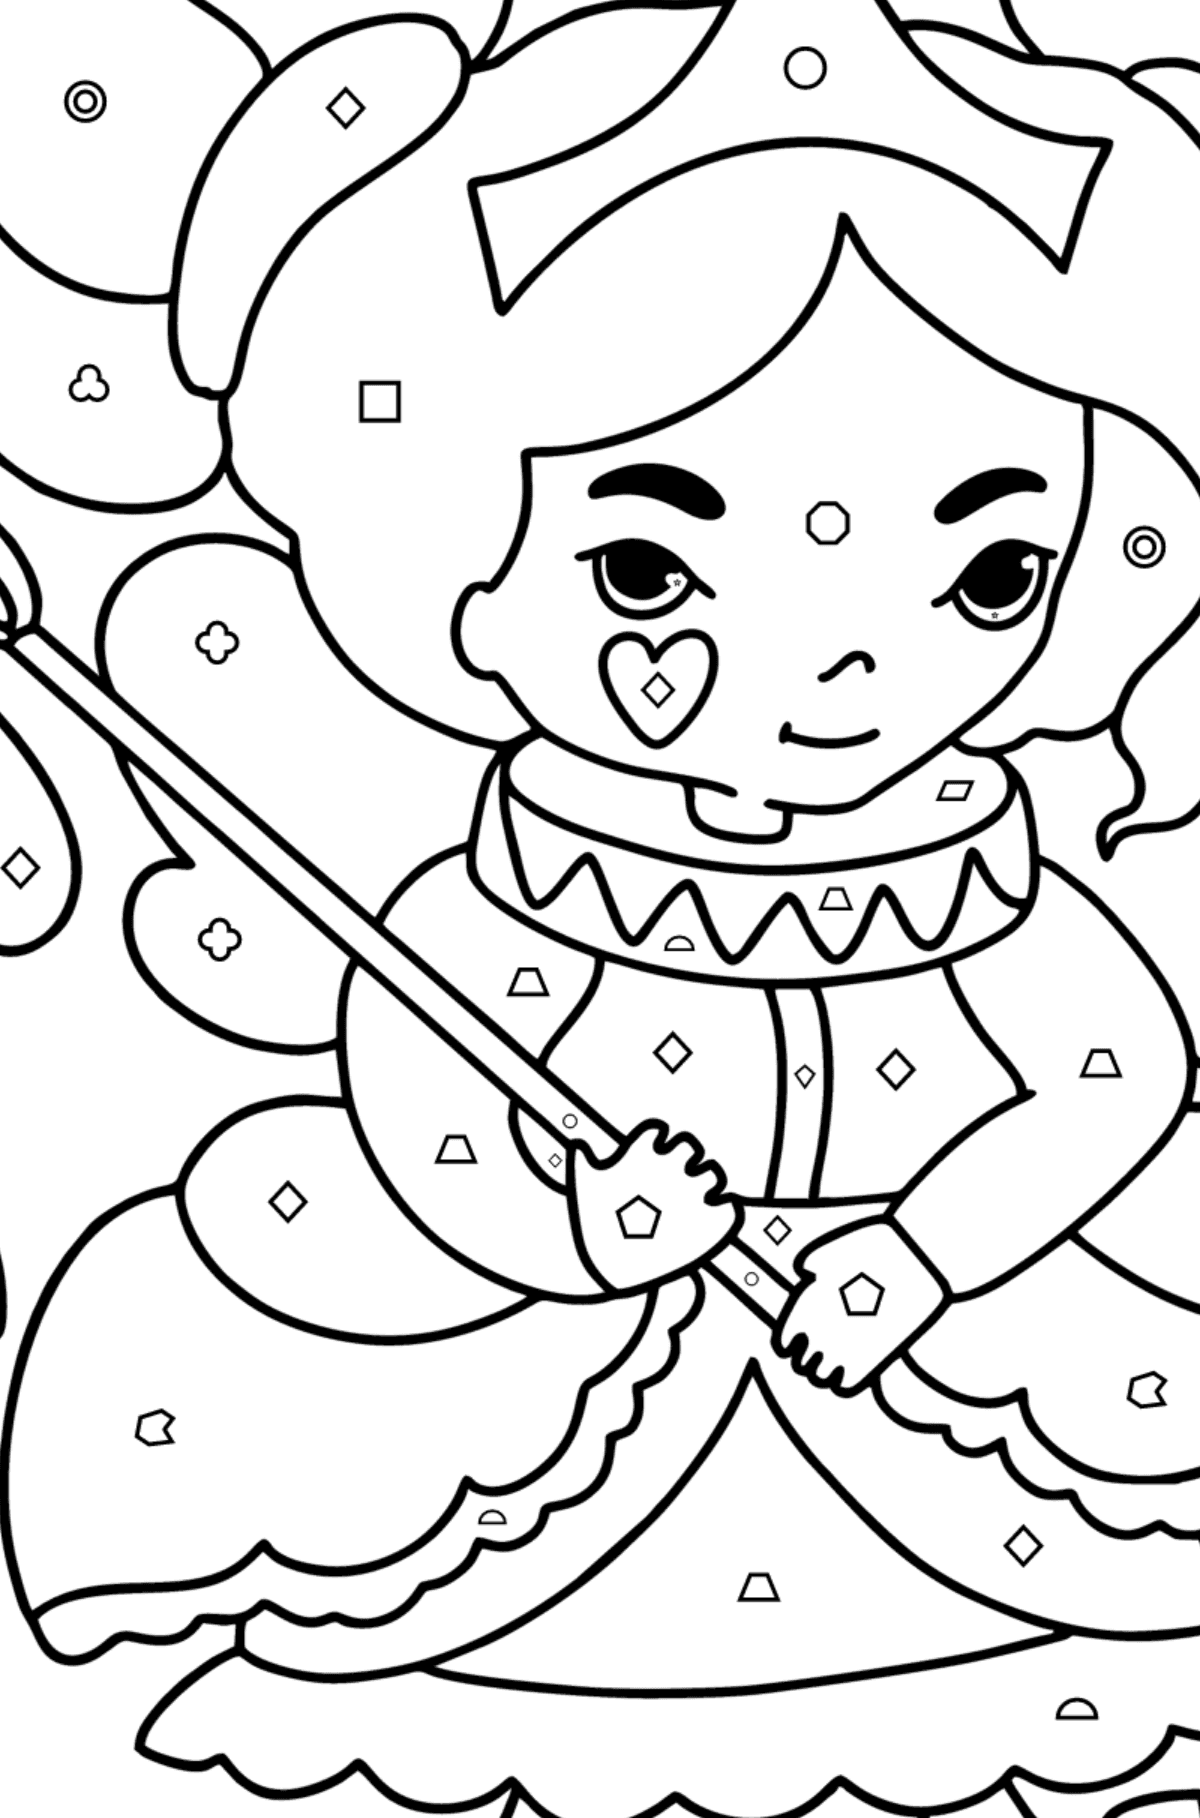 Fairy in a beautiful dress coloring page - Coloring by Geometric Shapes for Kids